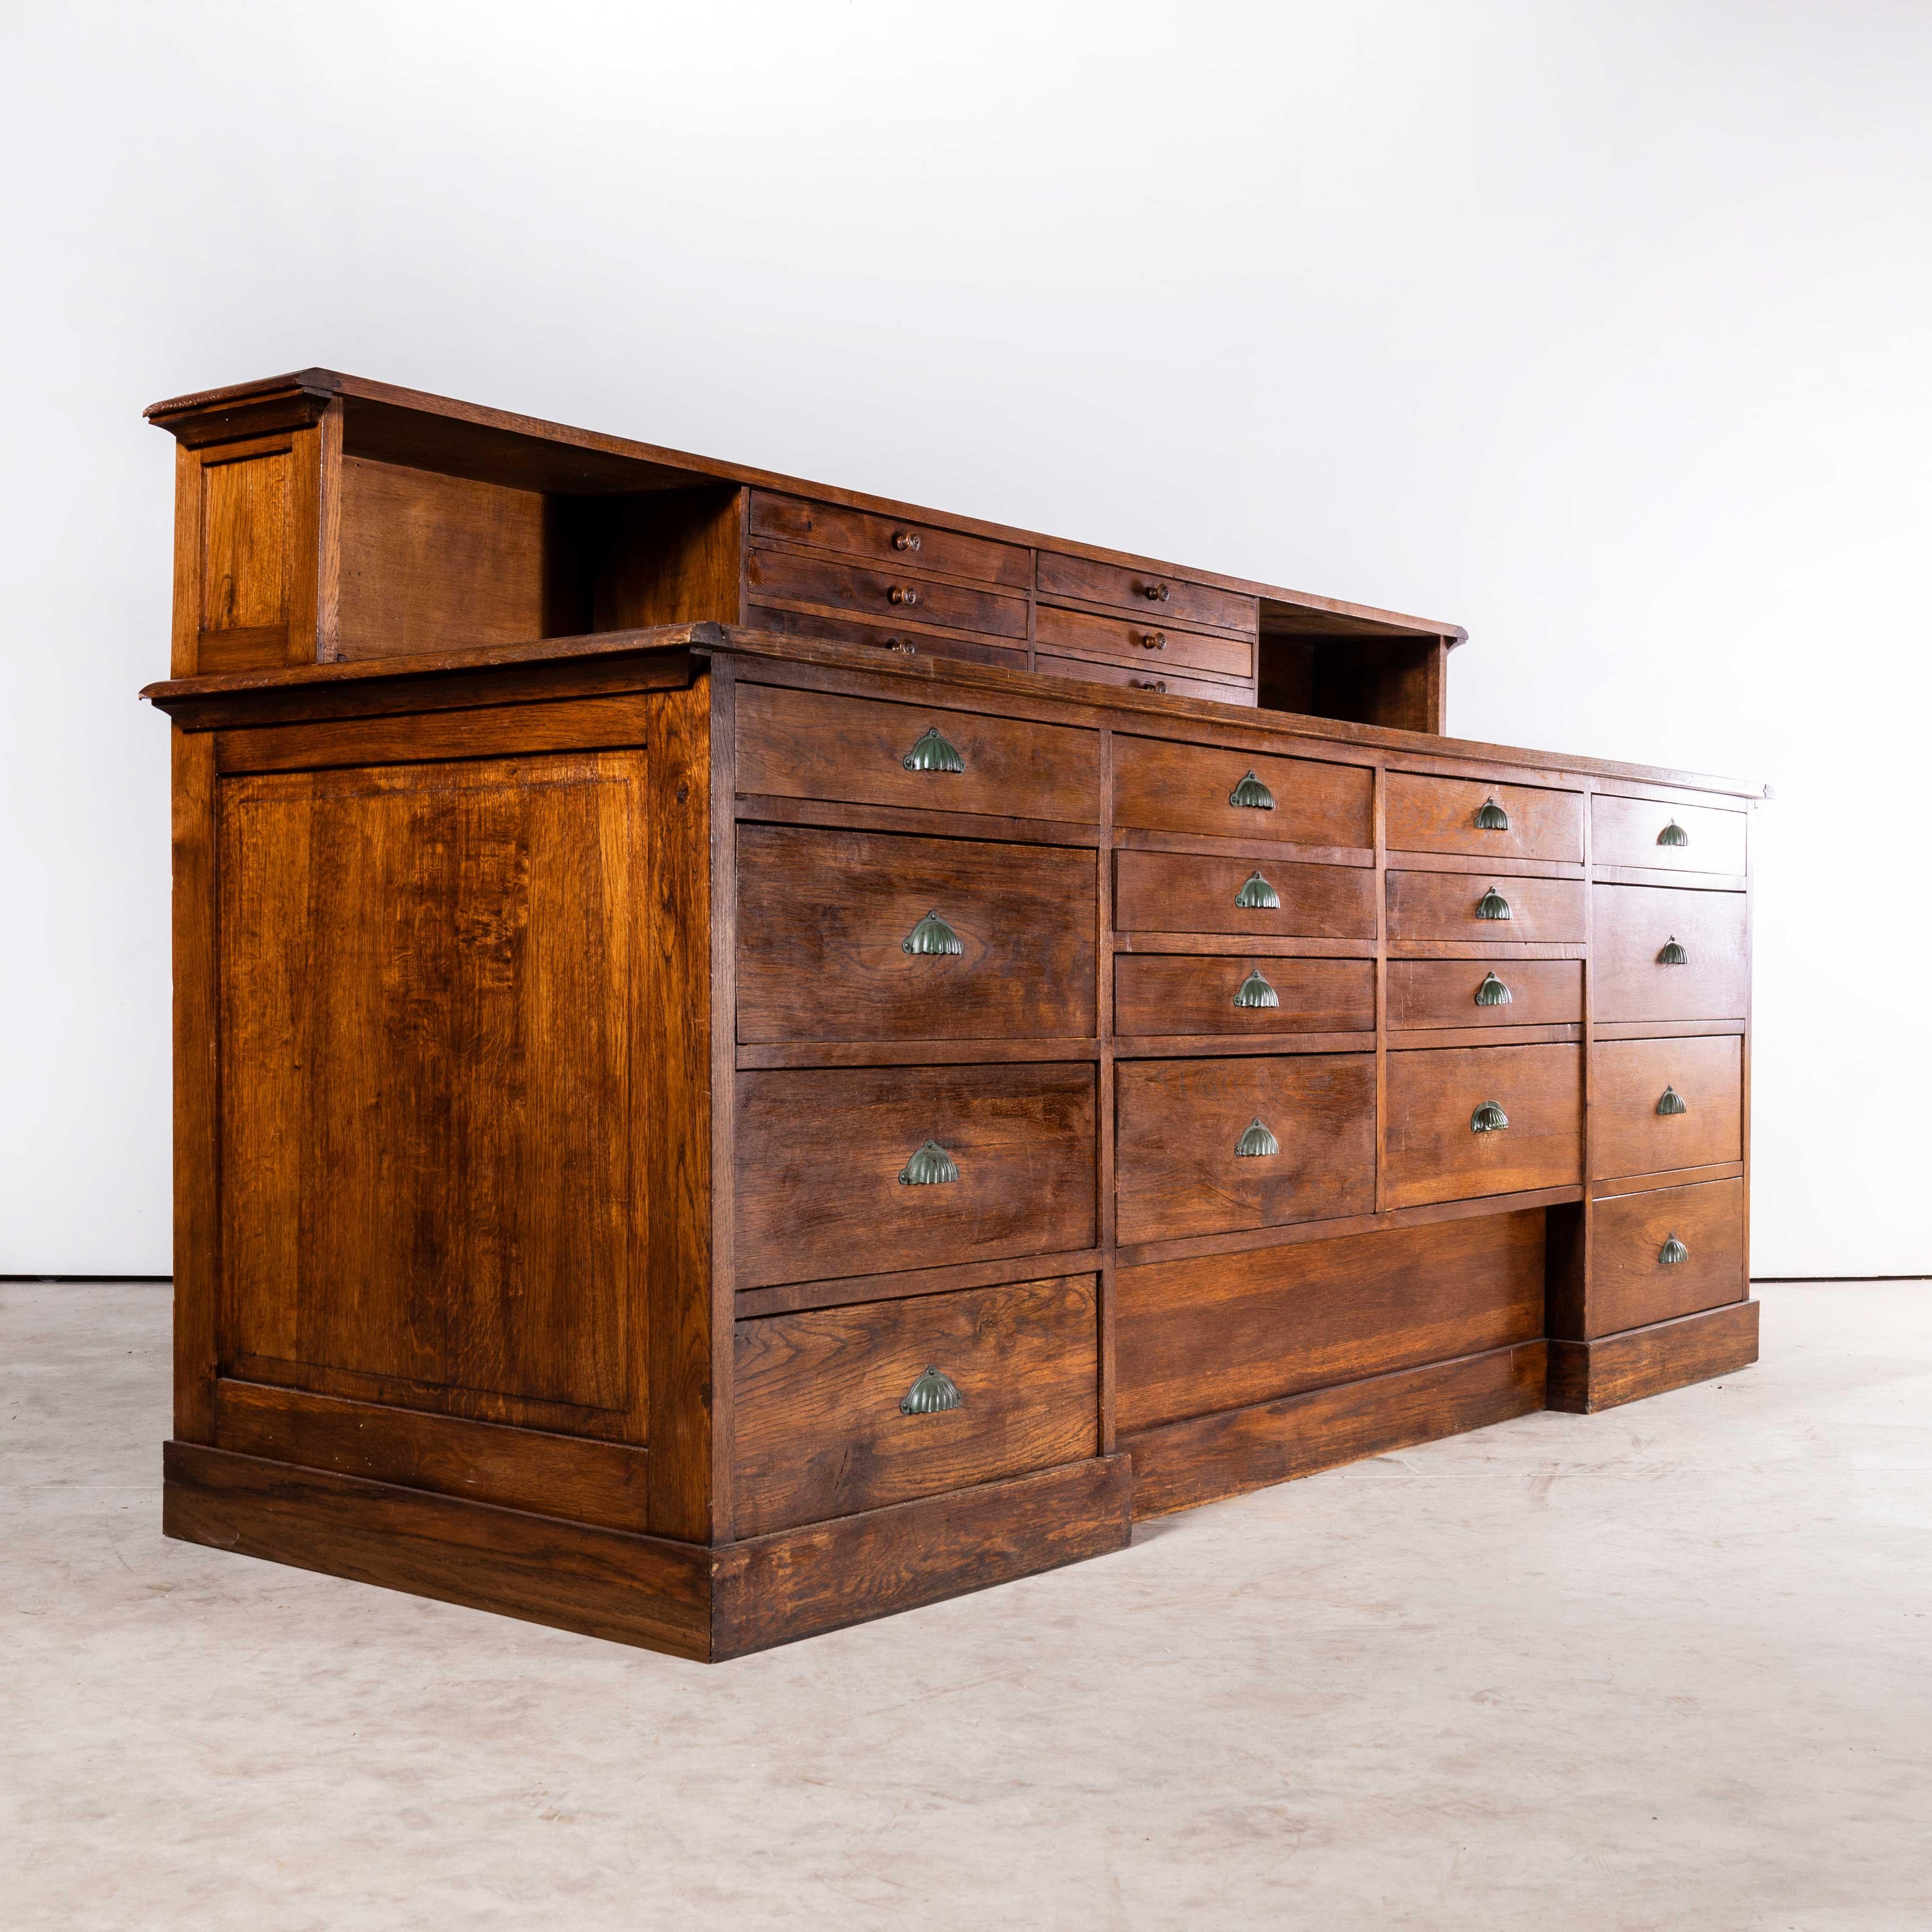 1930’s Very Large Belgian Oak Jewellers Workshop Bank Of Drawers
1930’s Very Large Belgian Oak Jewellers Workshop Bank Of Drawers. Sourced in Belgium this is an exceptional very large and substantial jewellers workshop cabinet. Made entirely of oak